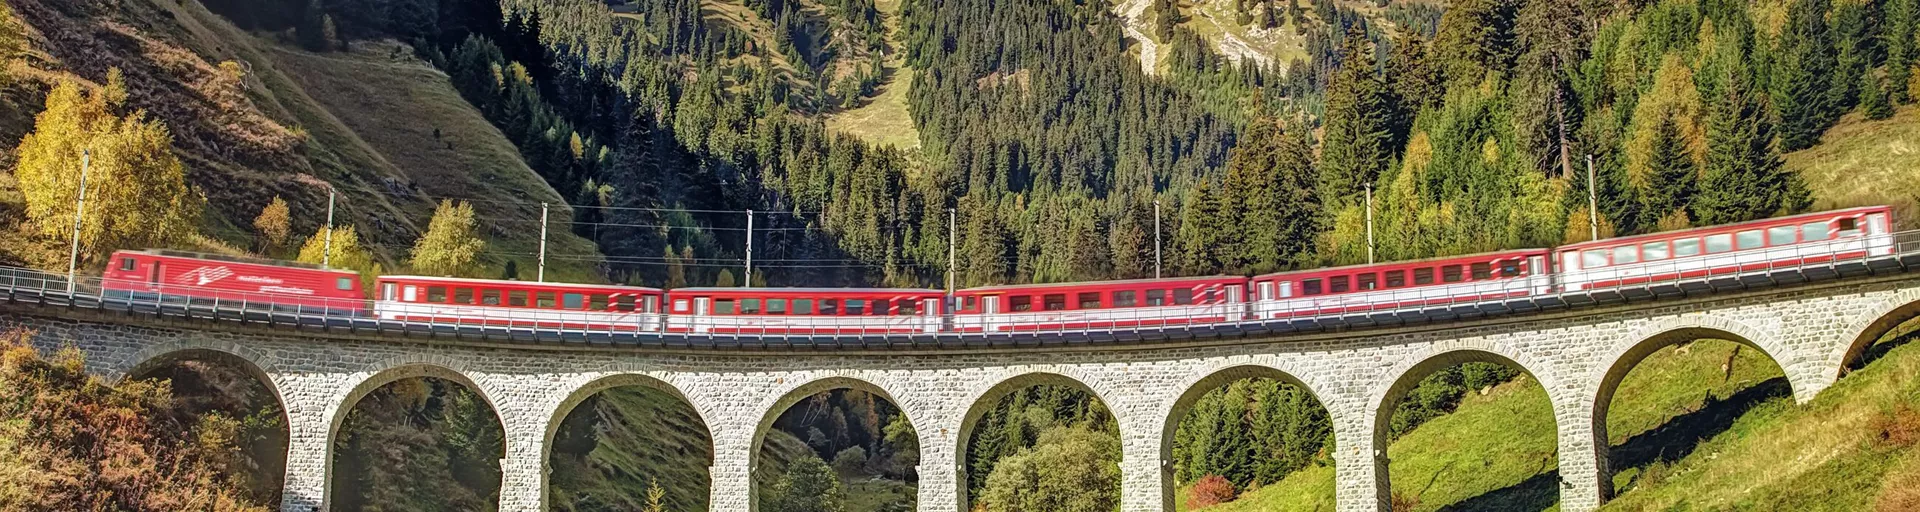 Red train on a viaduct in the Swiss Alps on a sunny day